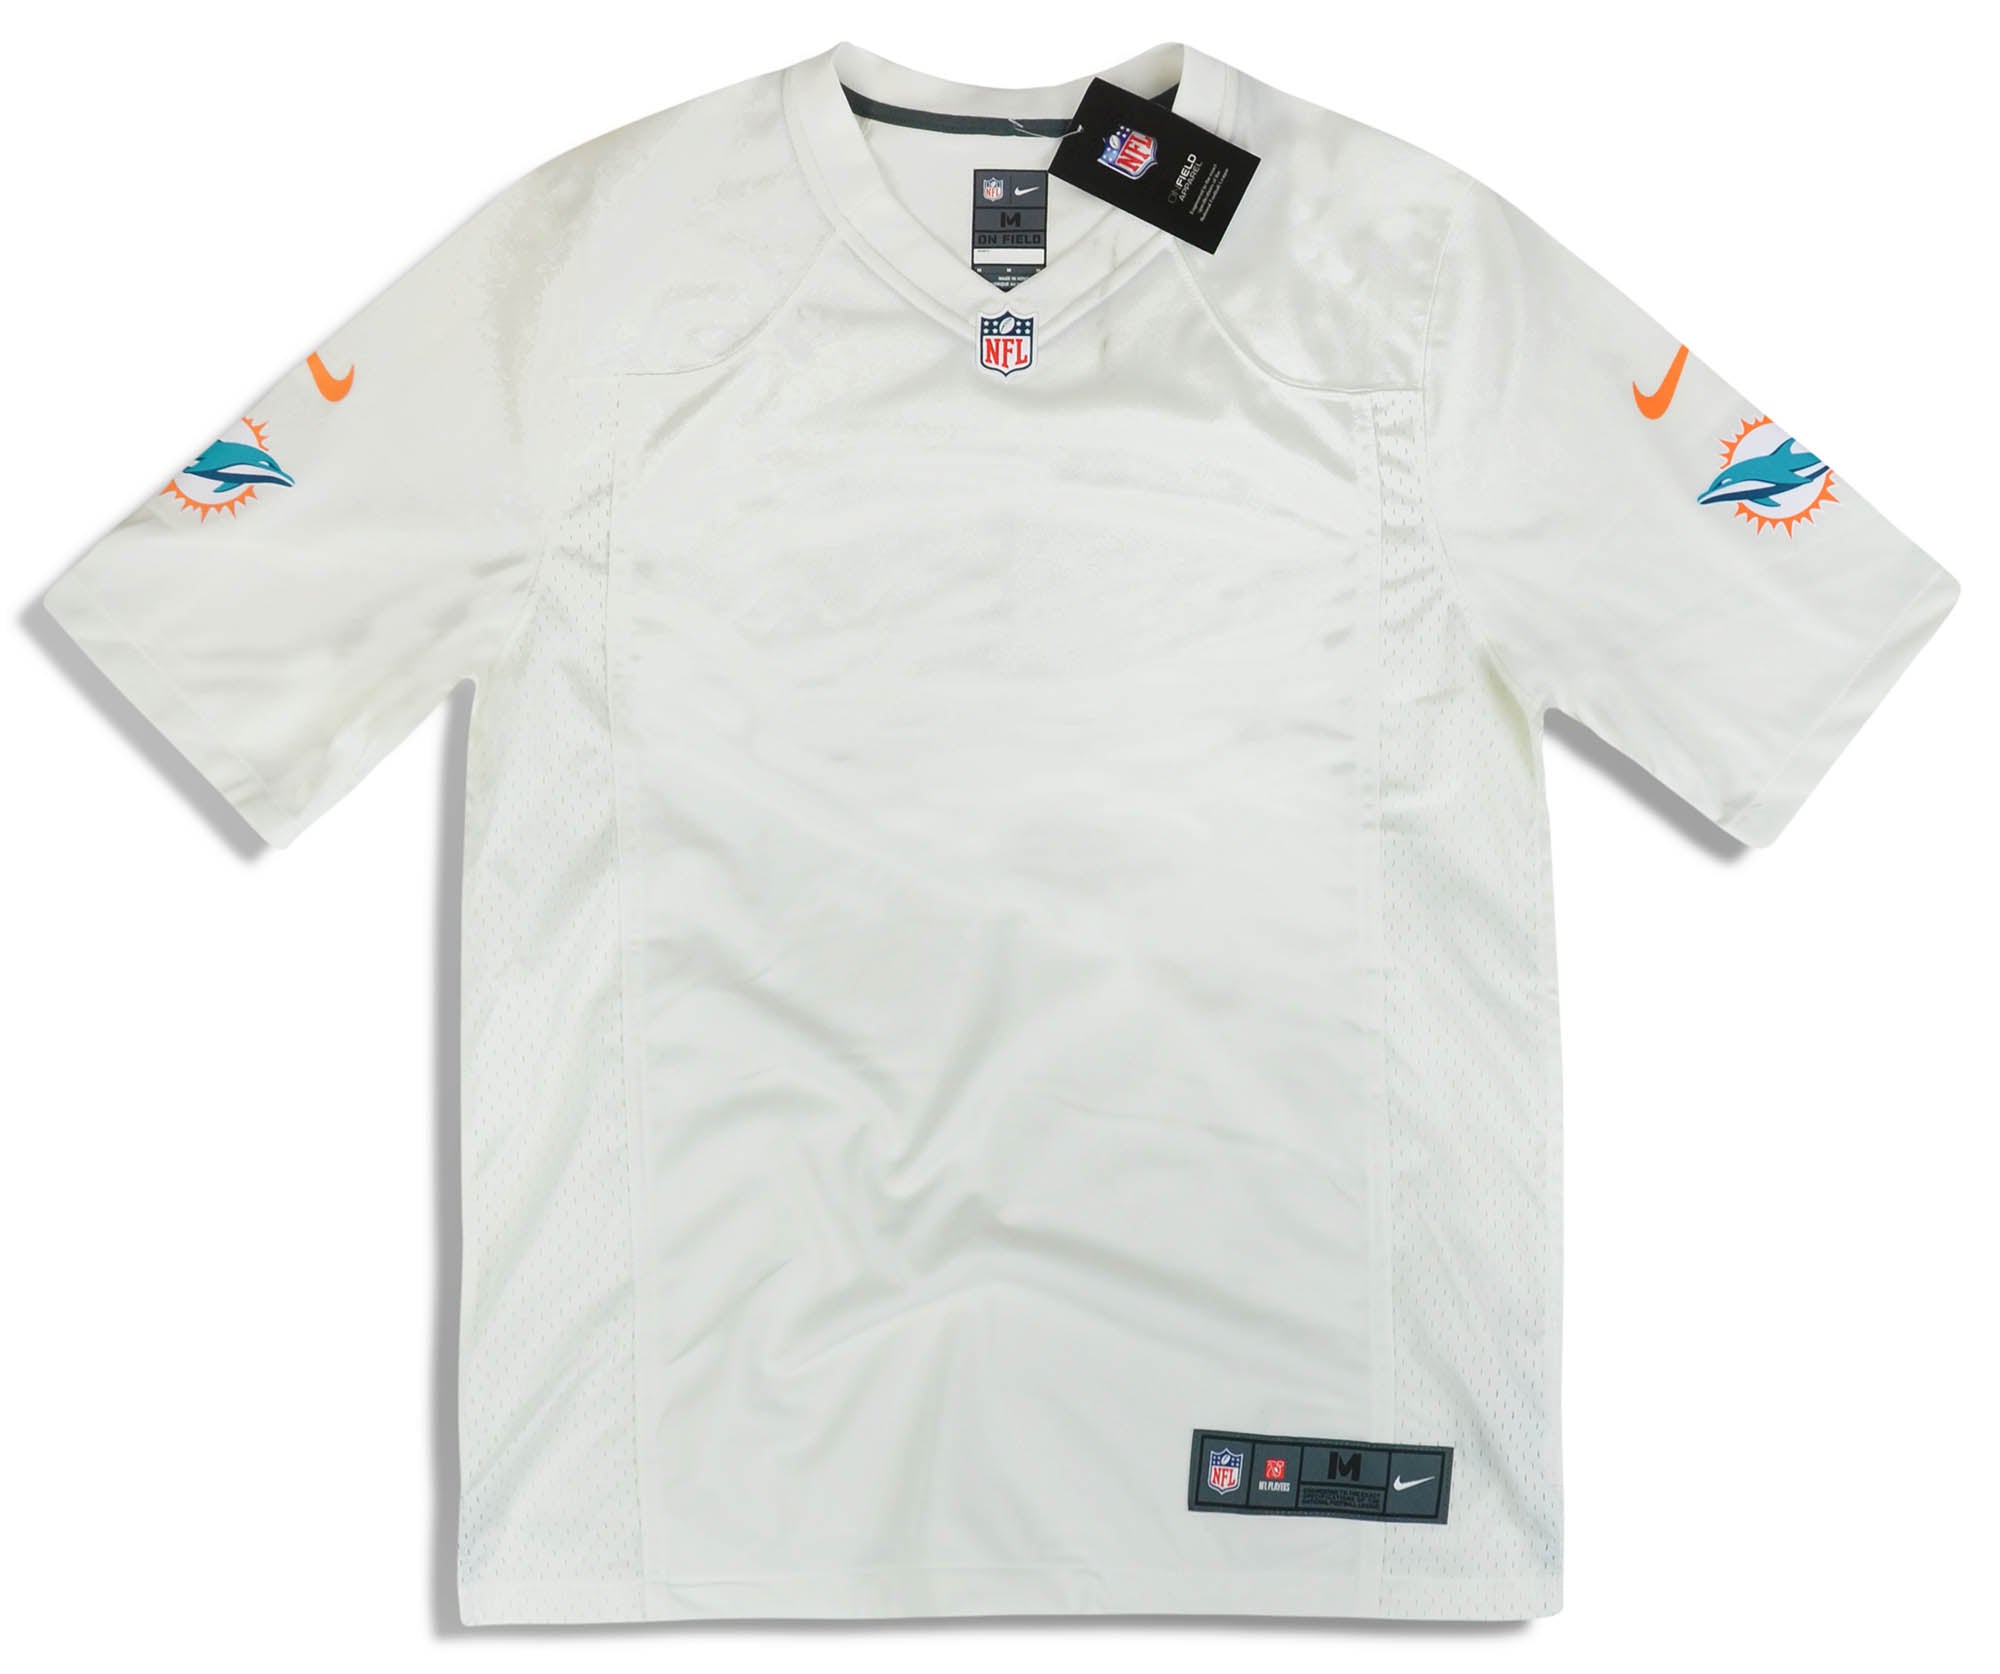 2018 MIAMI DOLPHINS NIKE GAME JERSEY (AWAY) M - W/TAGS